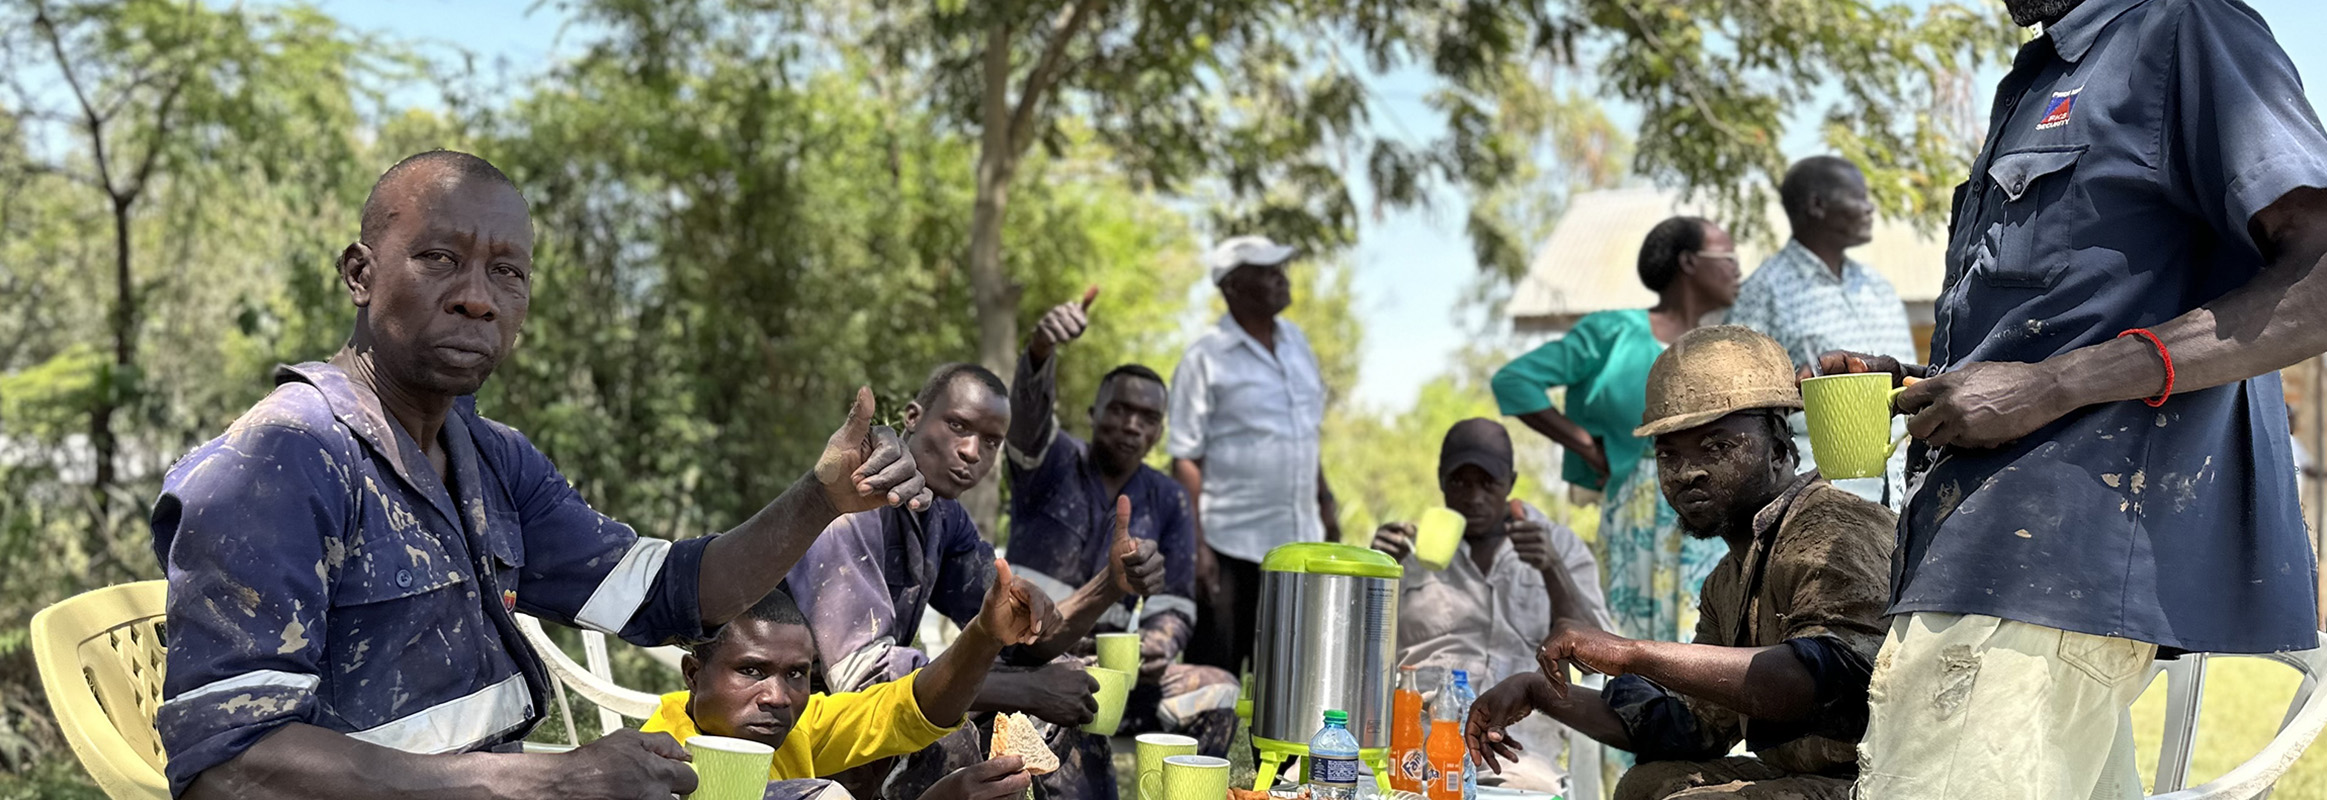 WellBoring Groundwater team members taking a well-deserved lunch break amid their impactful work of drilling boreholes for solar-powered wells at a local school.